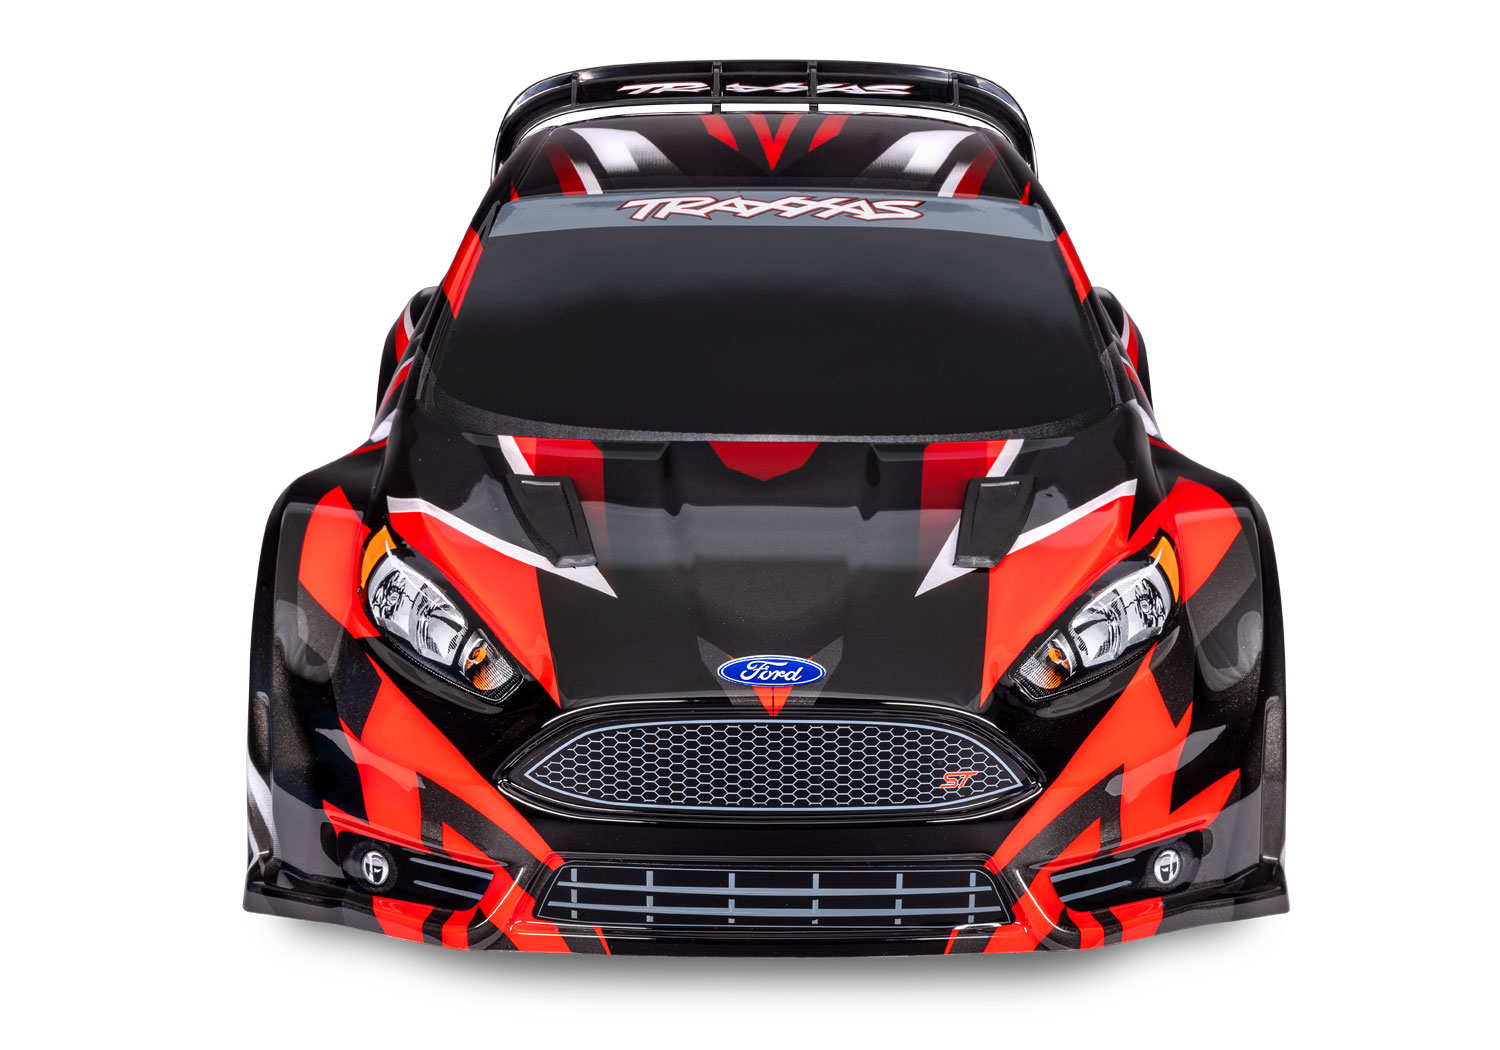 PACK ECO TRAXXAS FIESTA ST RALLY  BL-2S BRUSHLESS Rouge LIPO 2S CHARGEUR SAC OFFERT